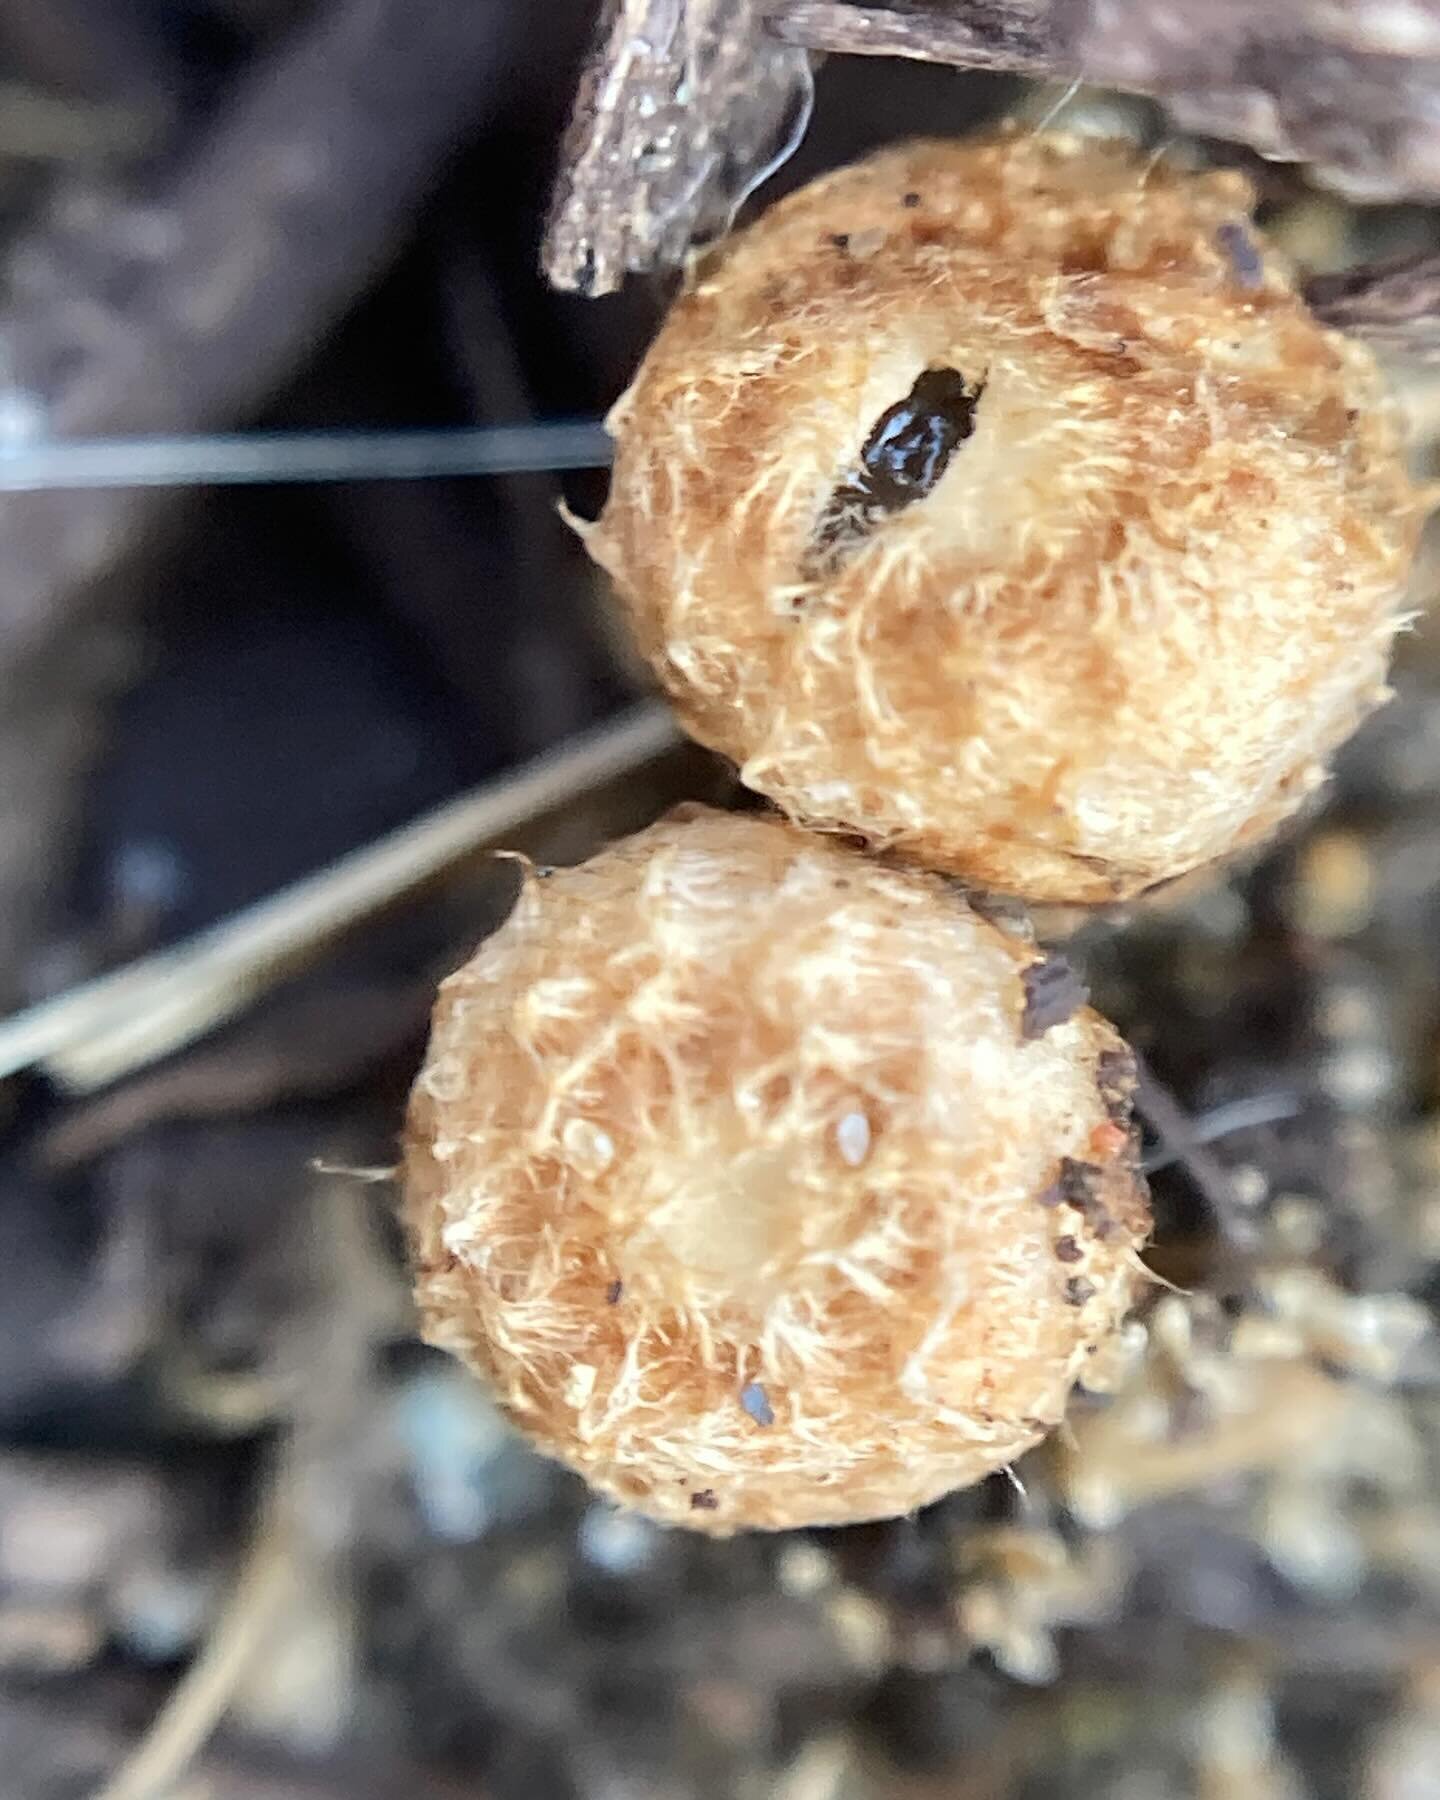 On 10/21/23, we met up at Oz Park. We walked around the park and the surrounding blocks. We found some cool things!!

1 - Cyathus stercoreus, still encased. The birds nests. Mead was telling the club about these before we found them.
2 - possibly Ros